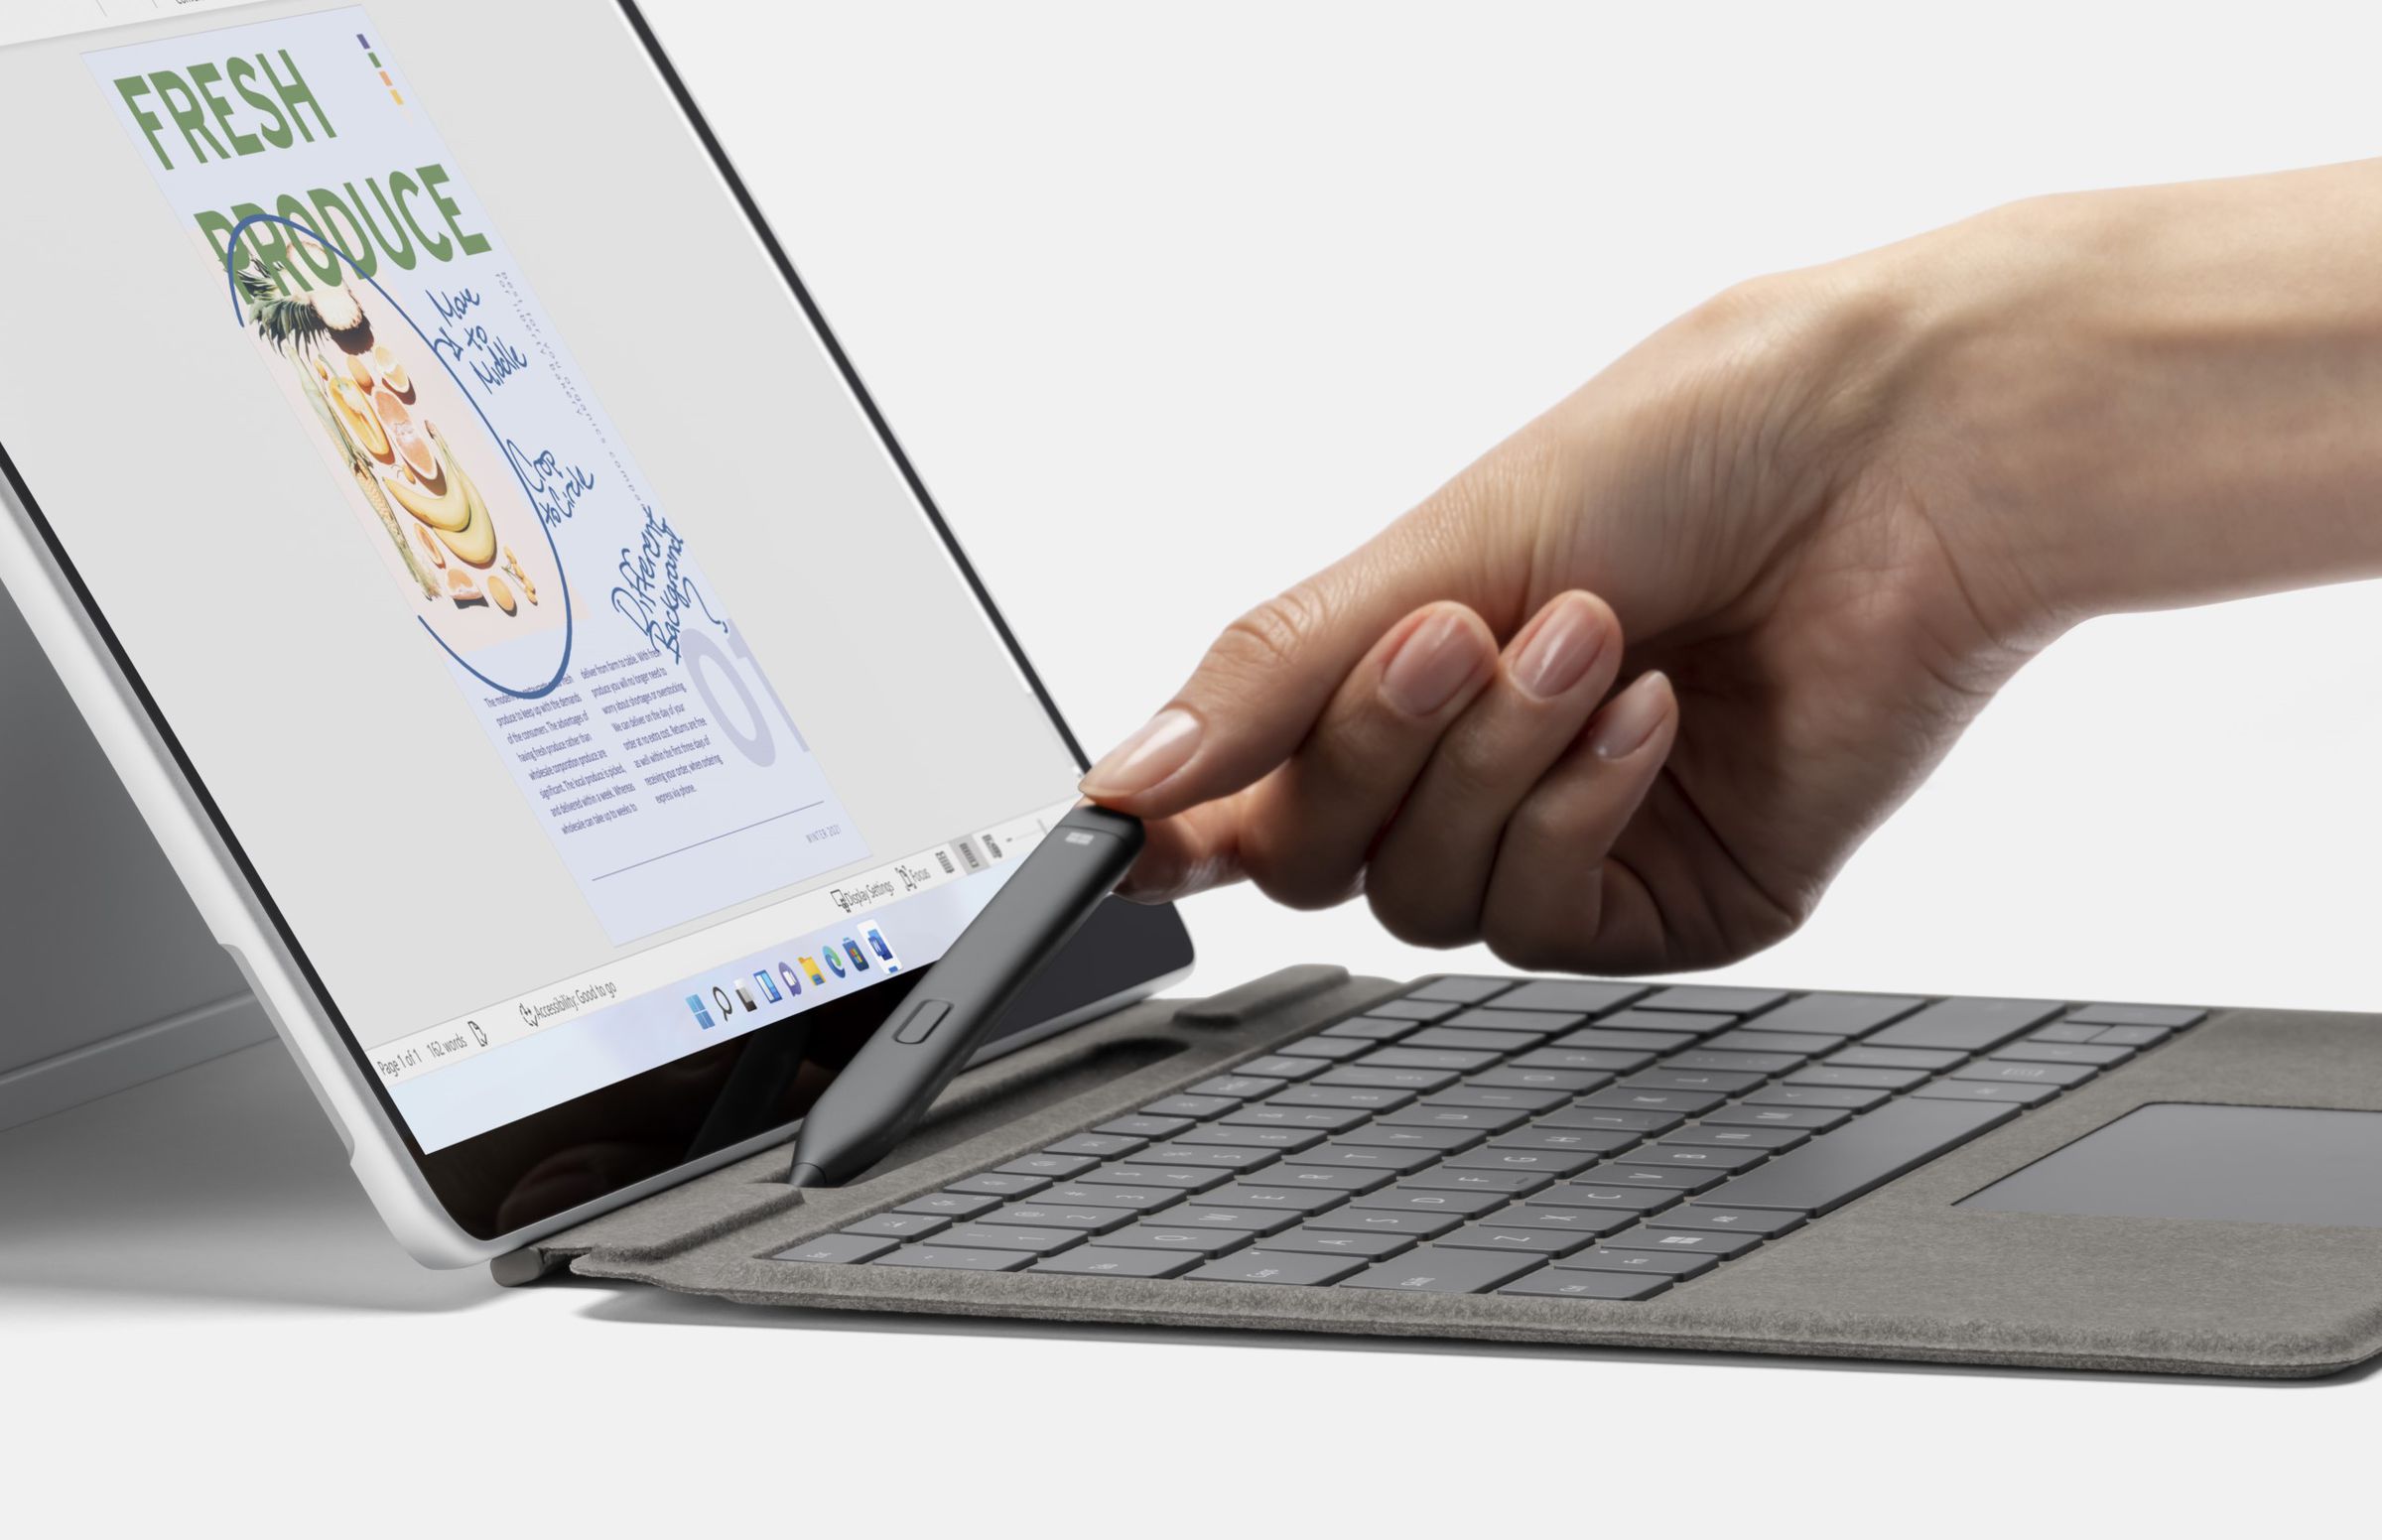 The Surface Pro 8 keyboard houses the new Surface Slim Pen 2.